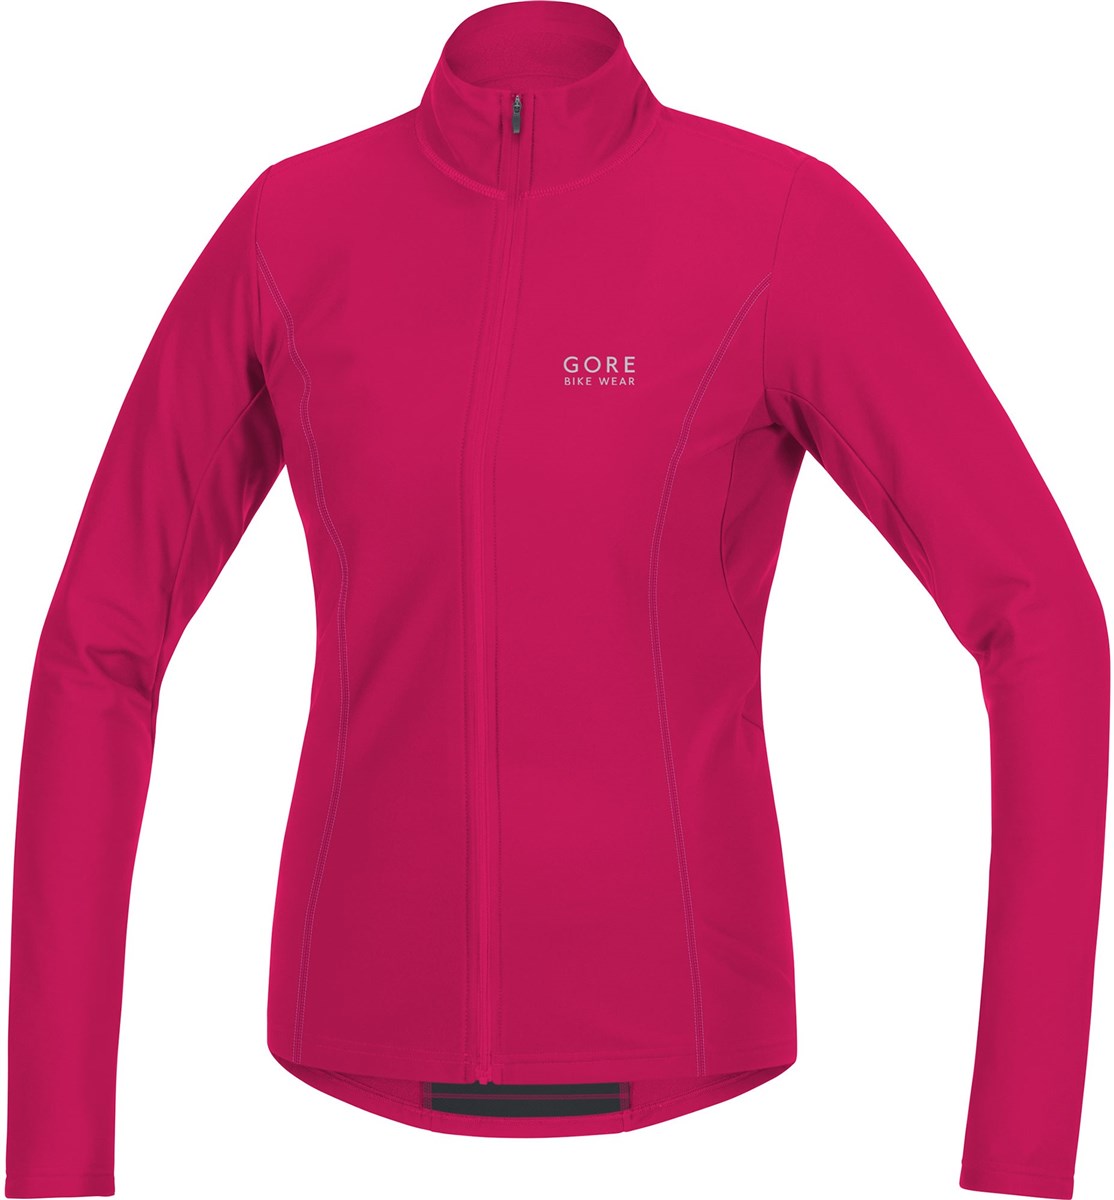 Gore E Thermo Womens Long Sleeve Jersey AW17 product image